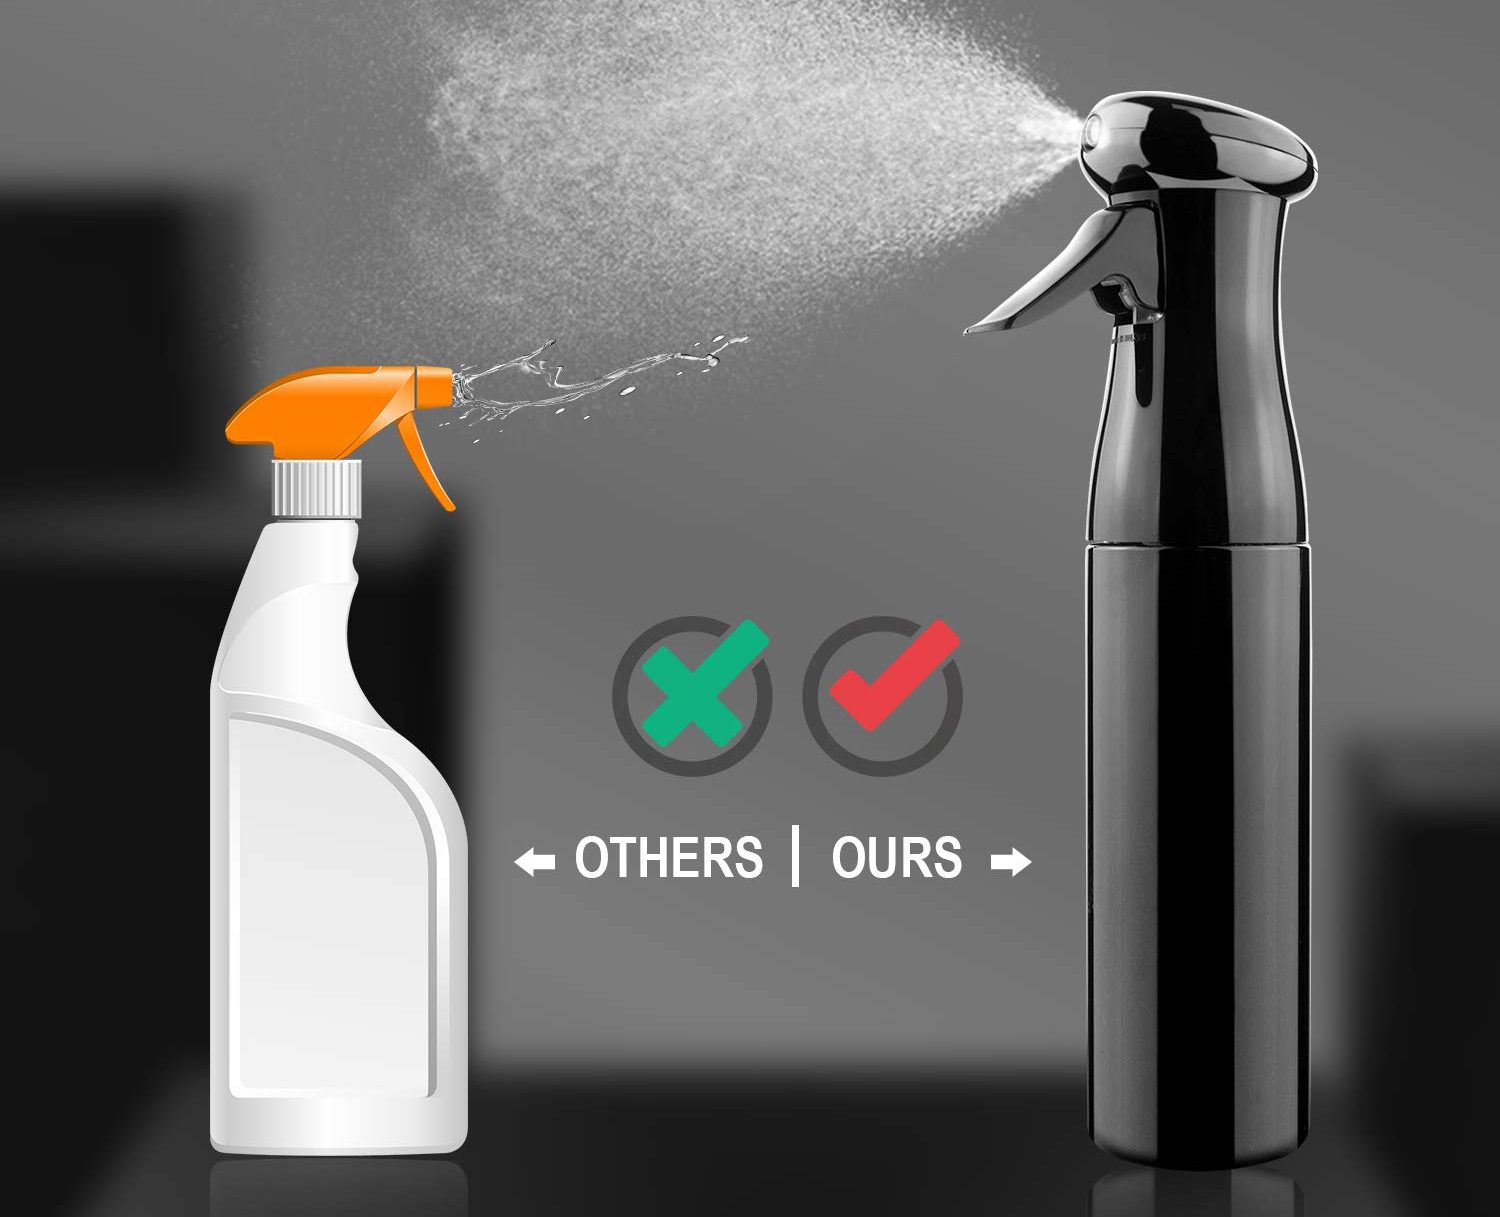 Advantages Over Traditional Spray Bottles